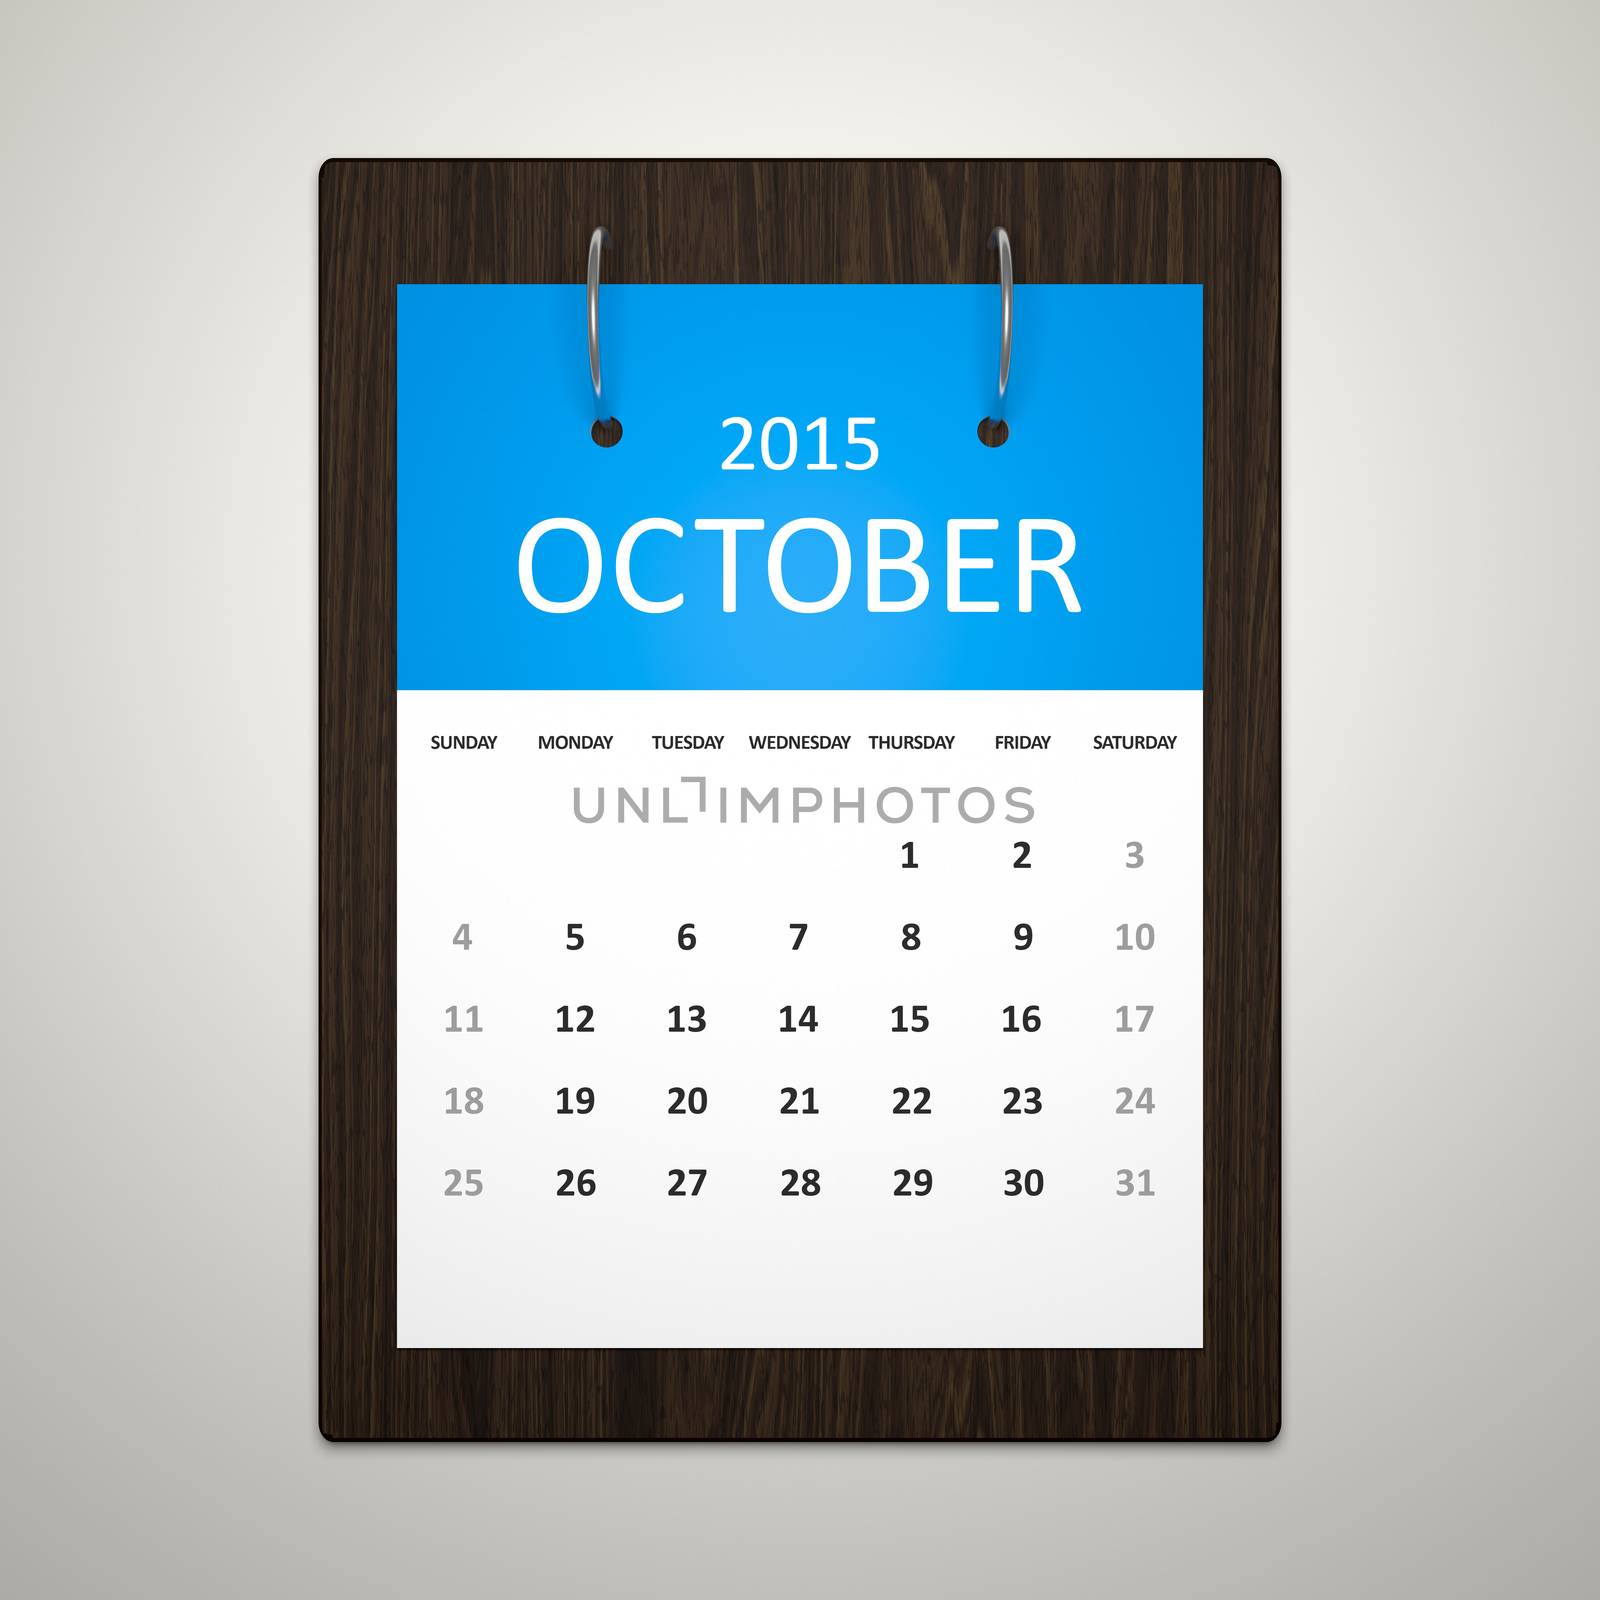 An image of a stylish calendar for event planning October 2015